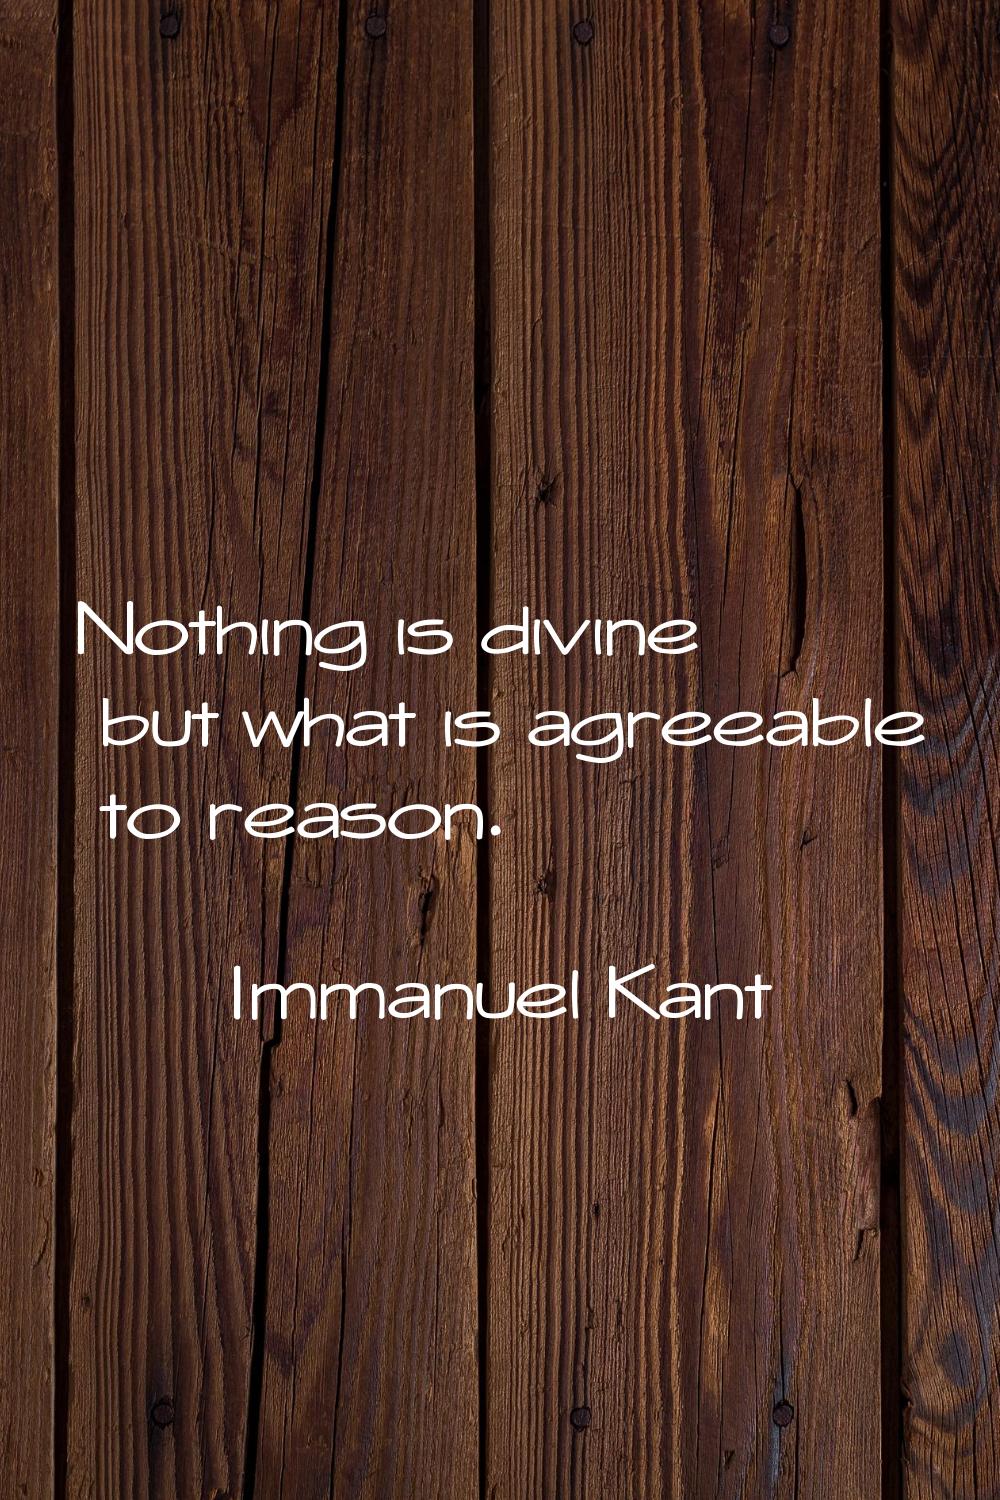 Nothing is divine but what is agreeable to reason.